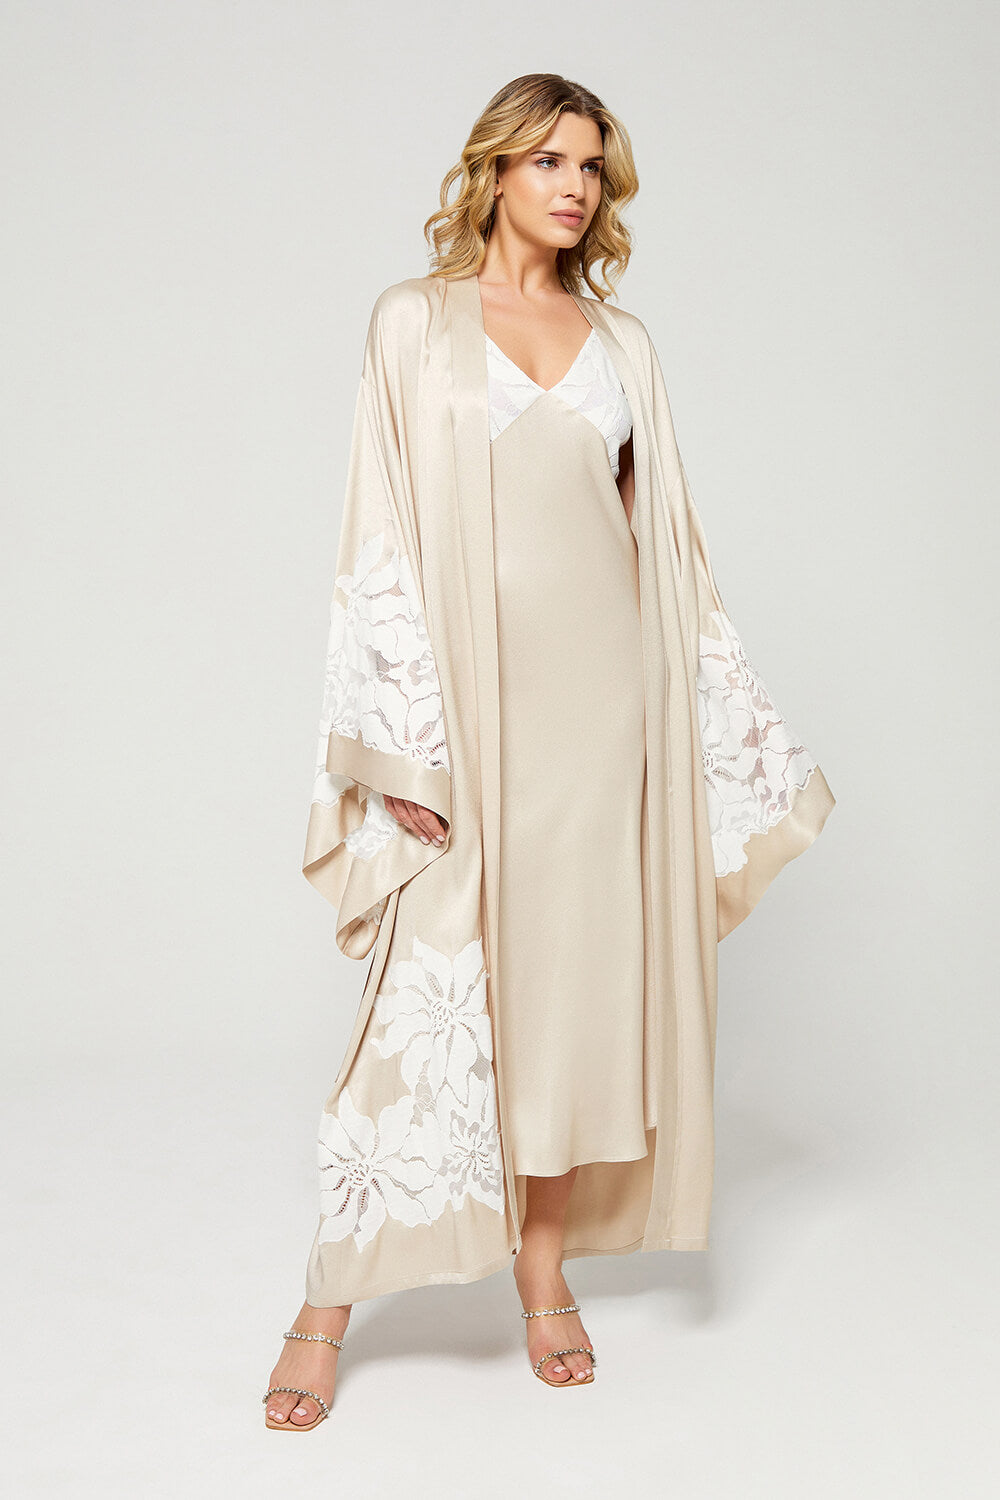 Argos Long Rayon Trimmed with Lace Robe Set - Beige